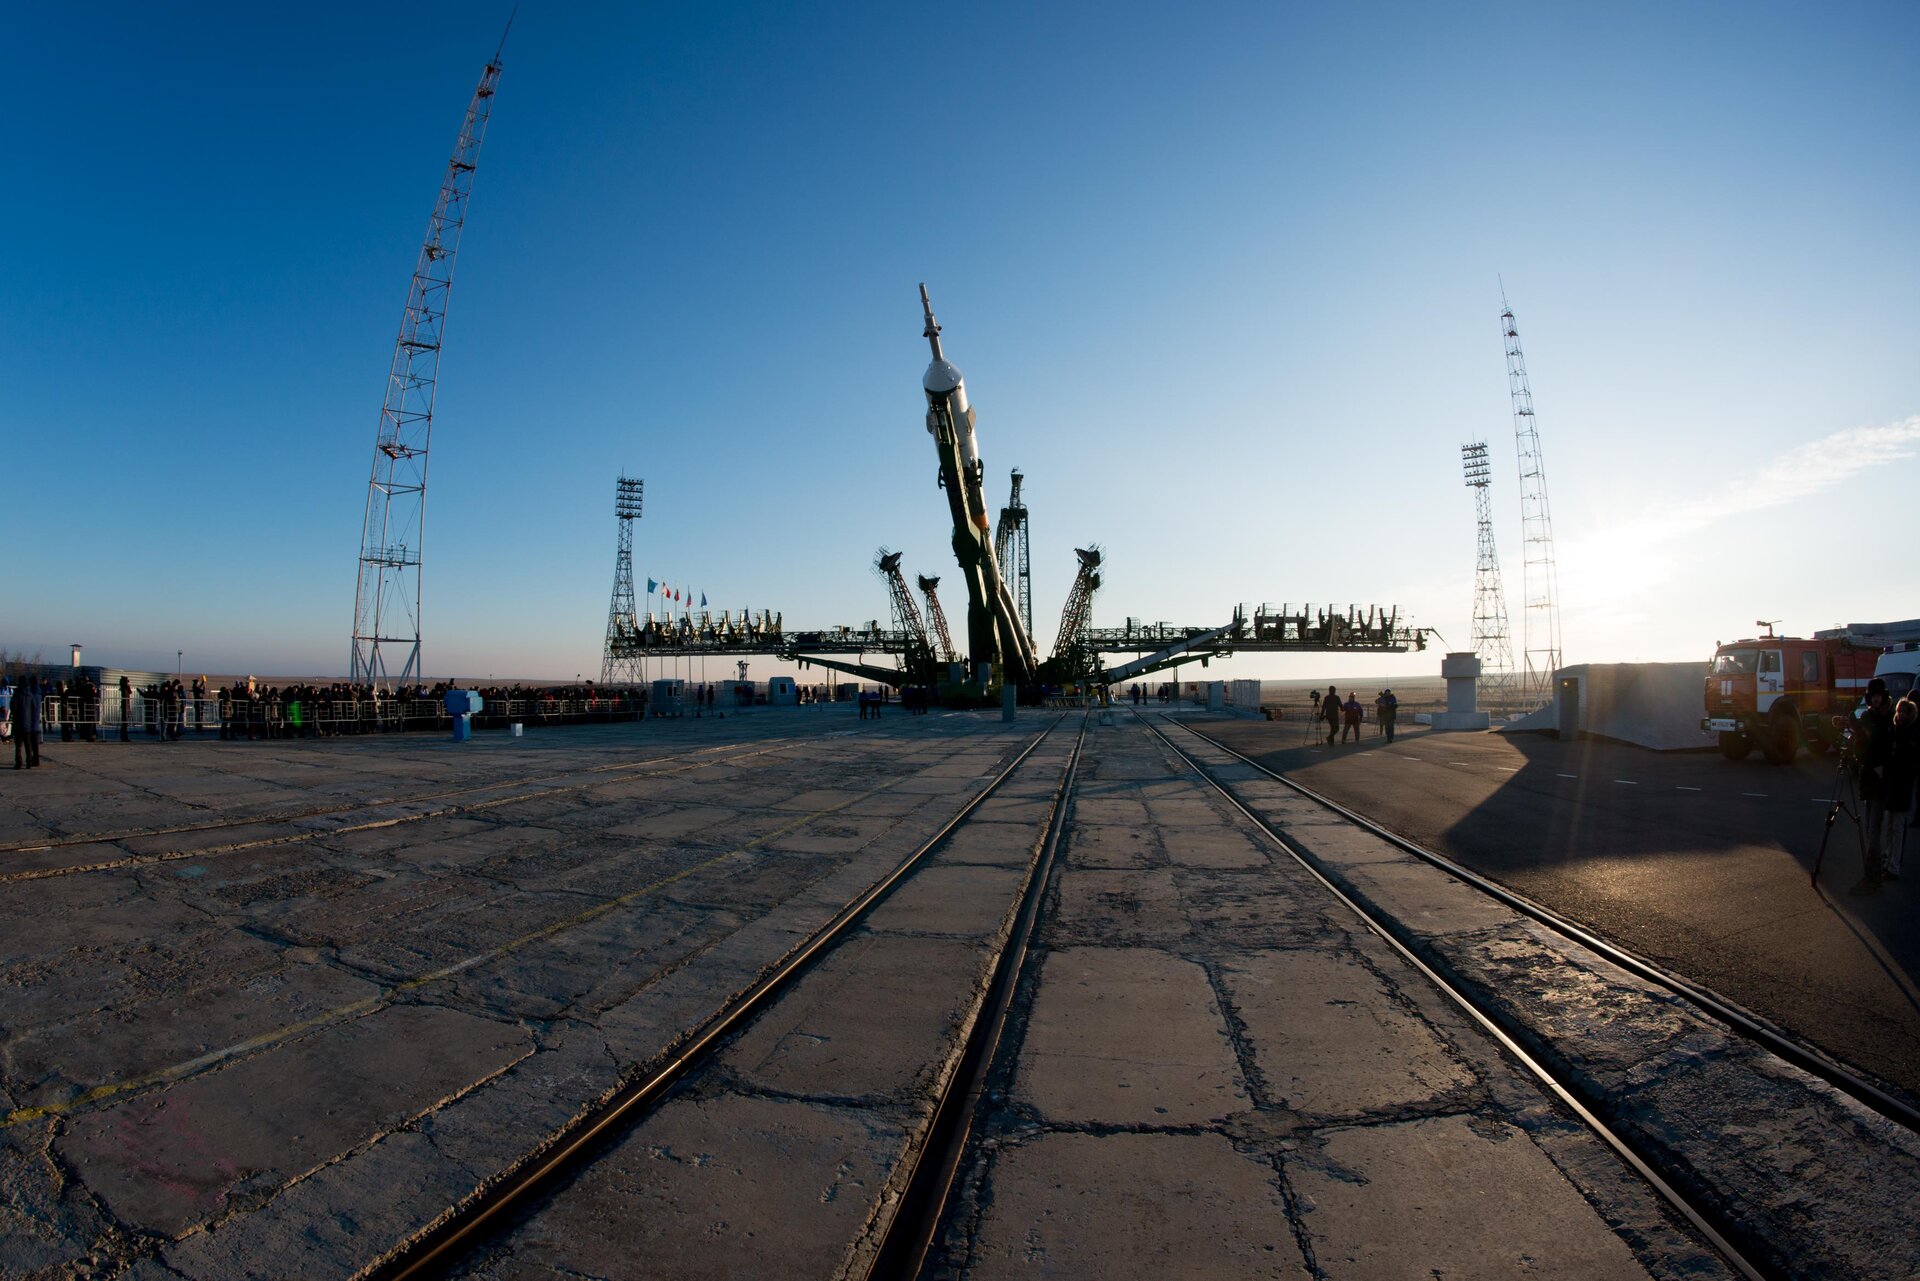 Soyuz spacecraft moved into vertical position